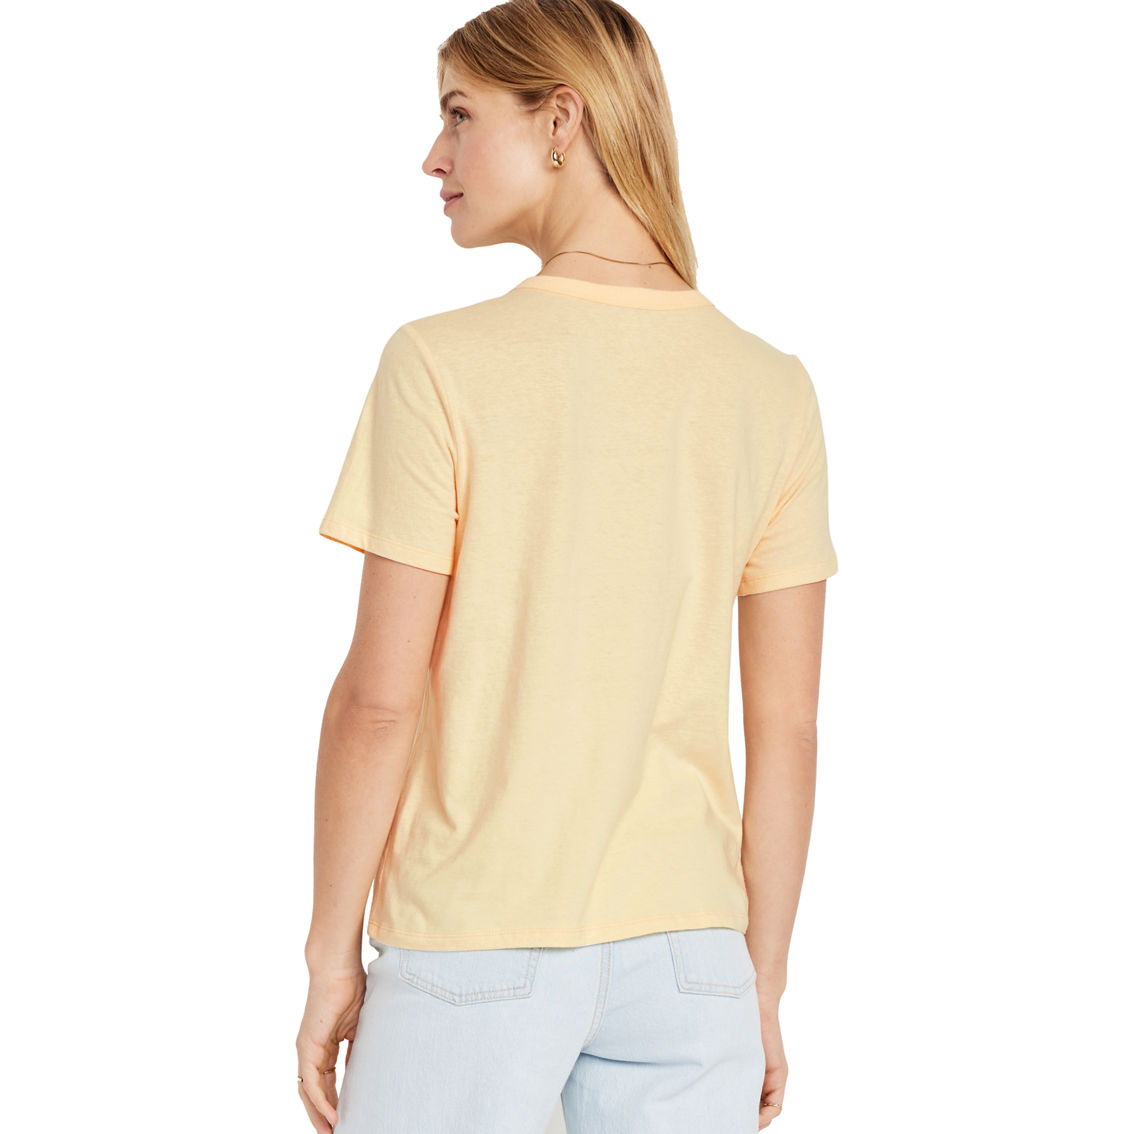 Old Navy Graphic Logo Tee - Image 2 of 2